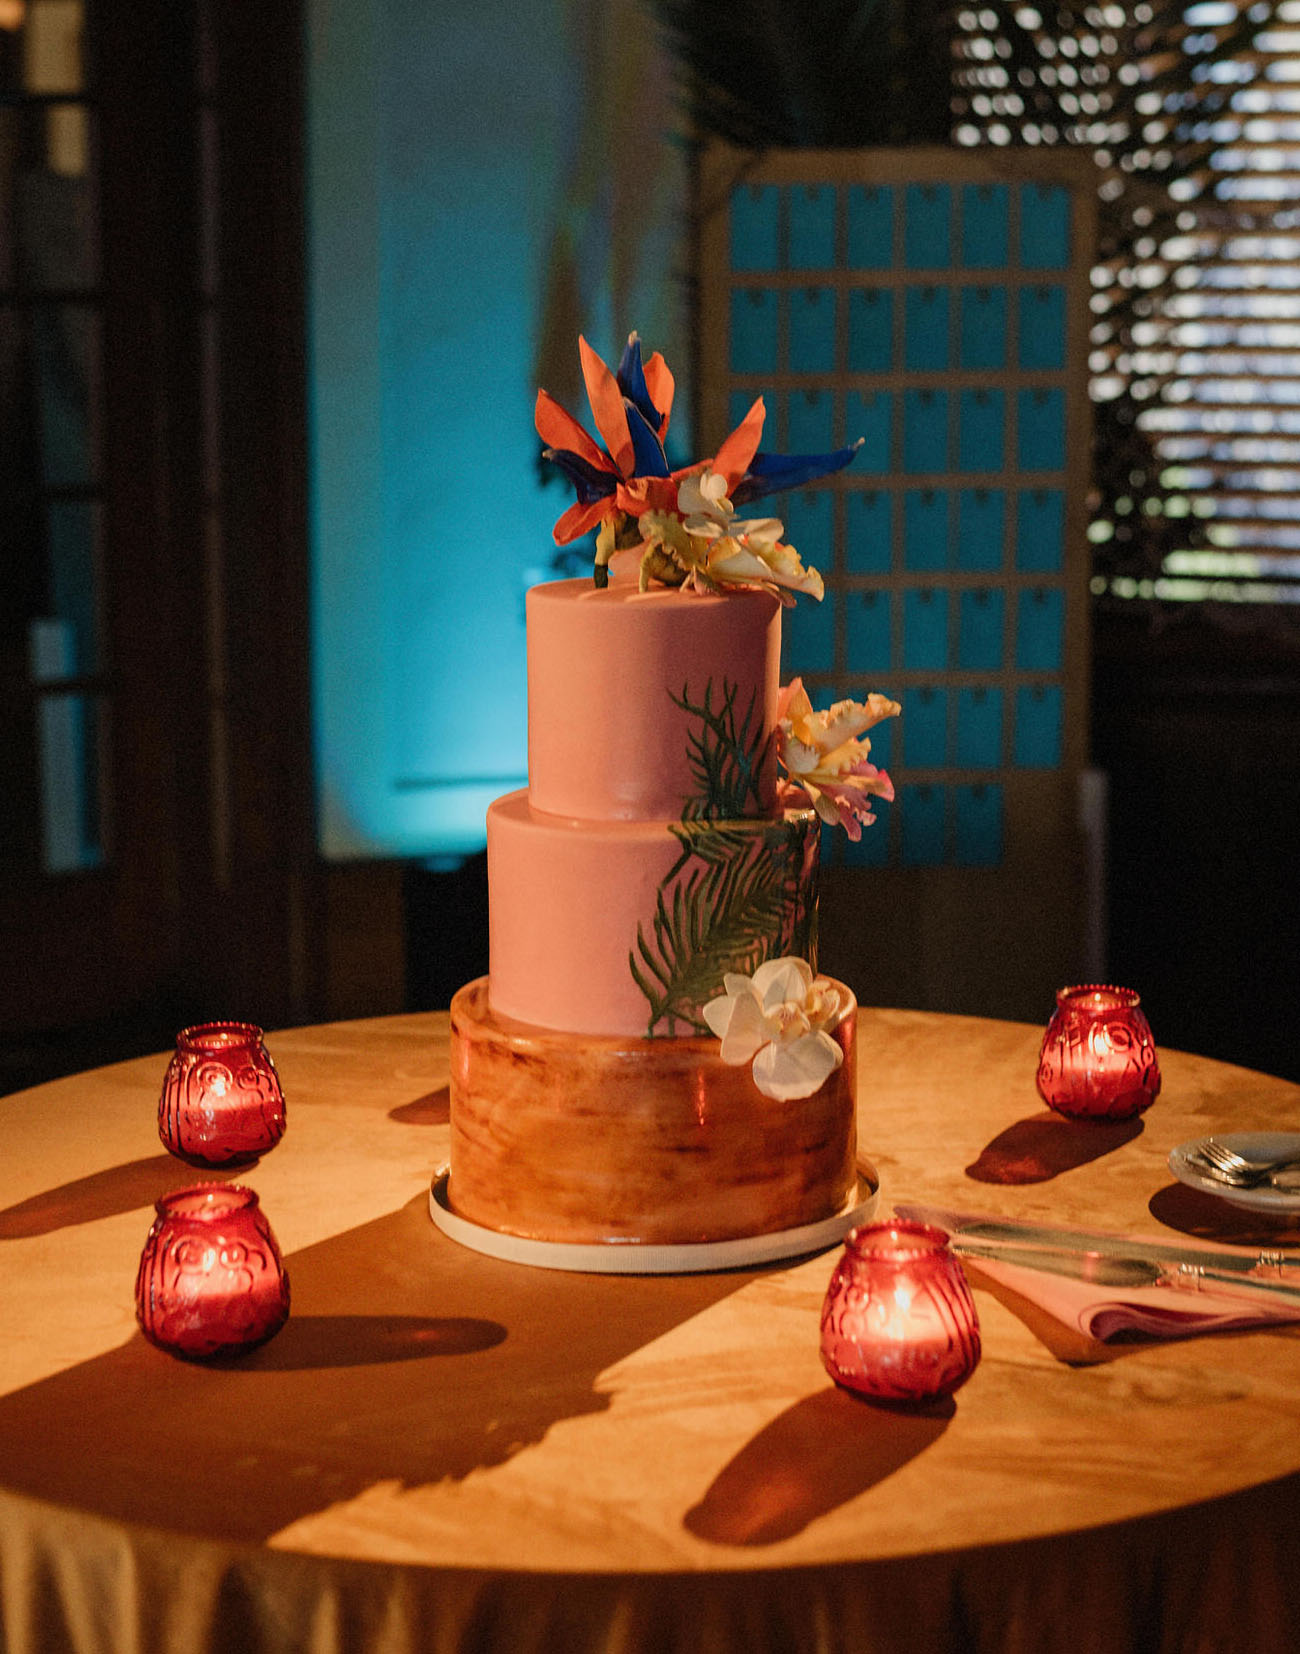 The wedding cake was pink and amber, with large tropical blooms and greenery